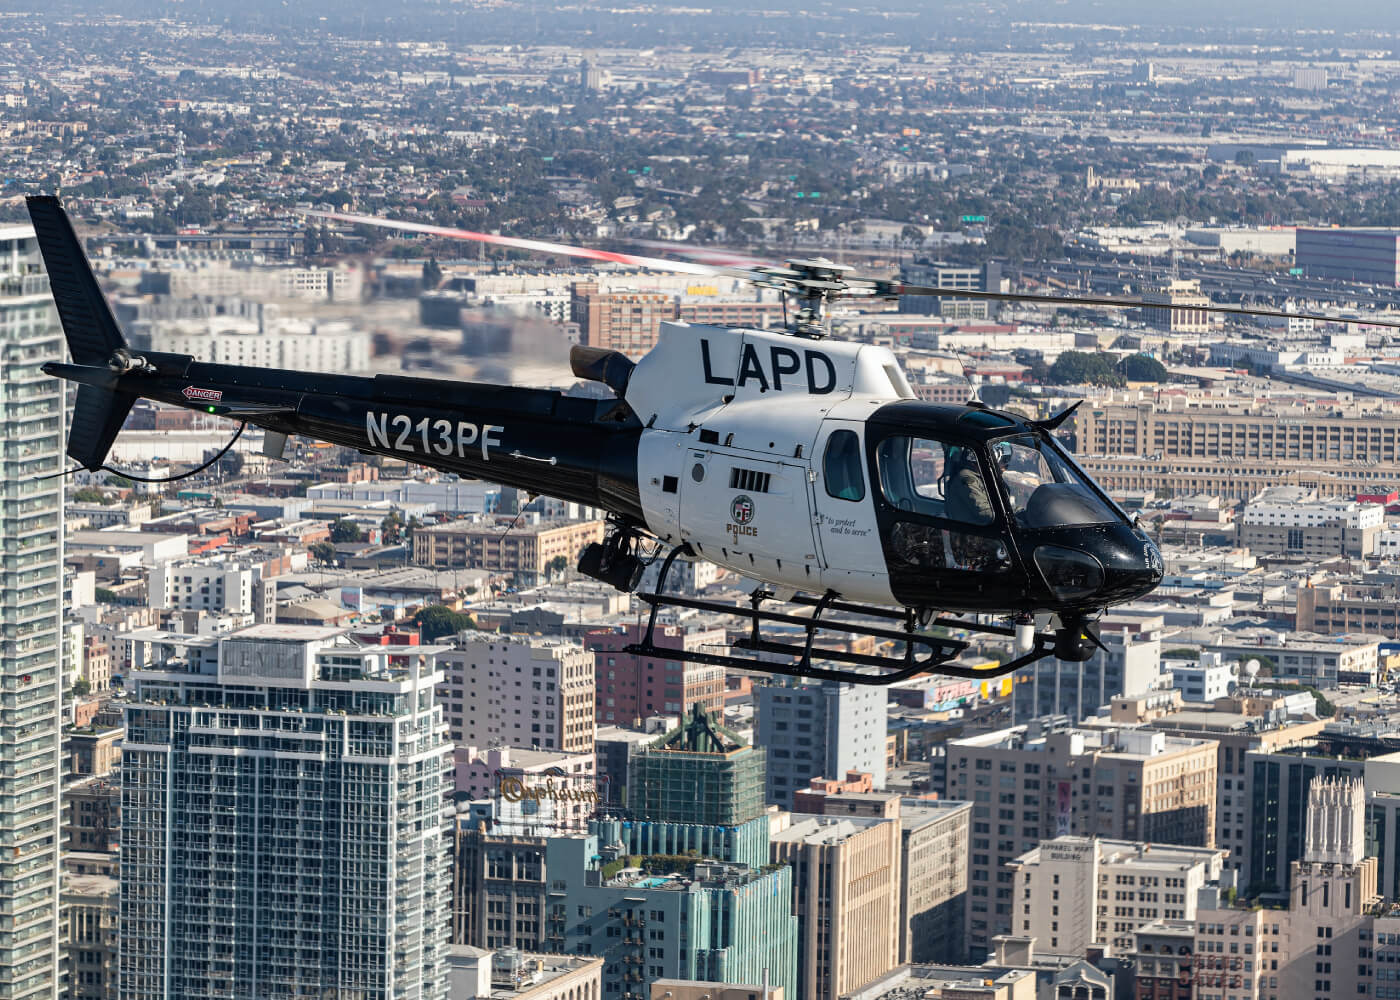 LAPD Air Support: Training for tactical and disaster preparedness